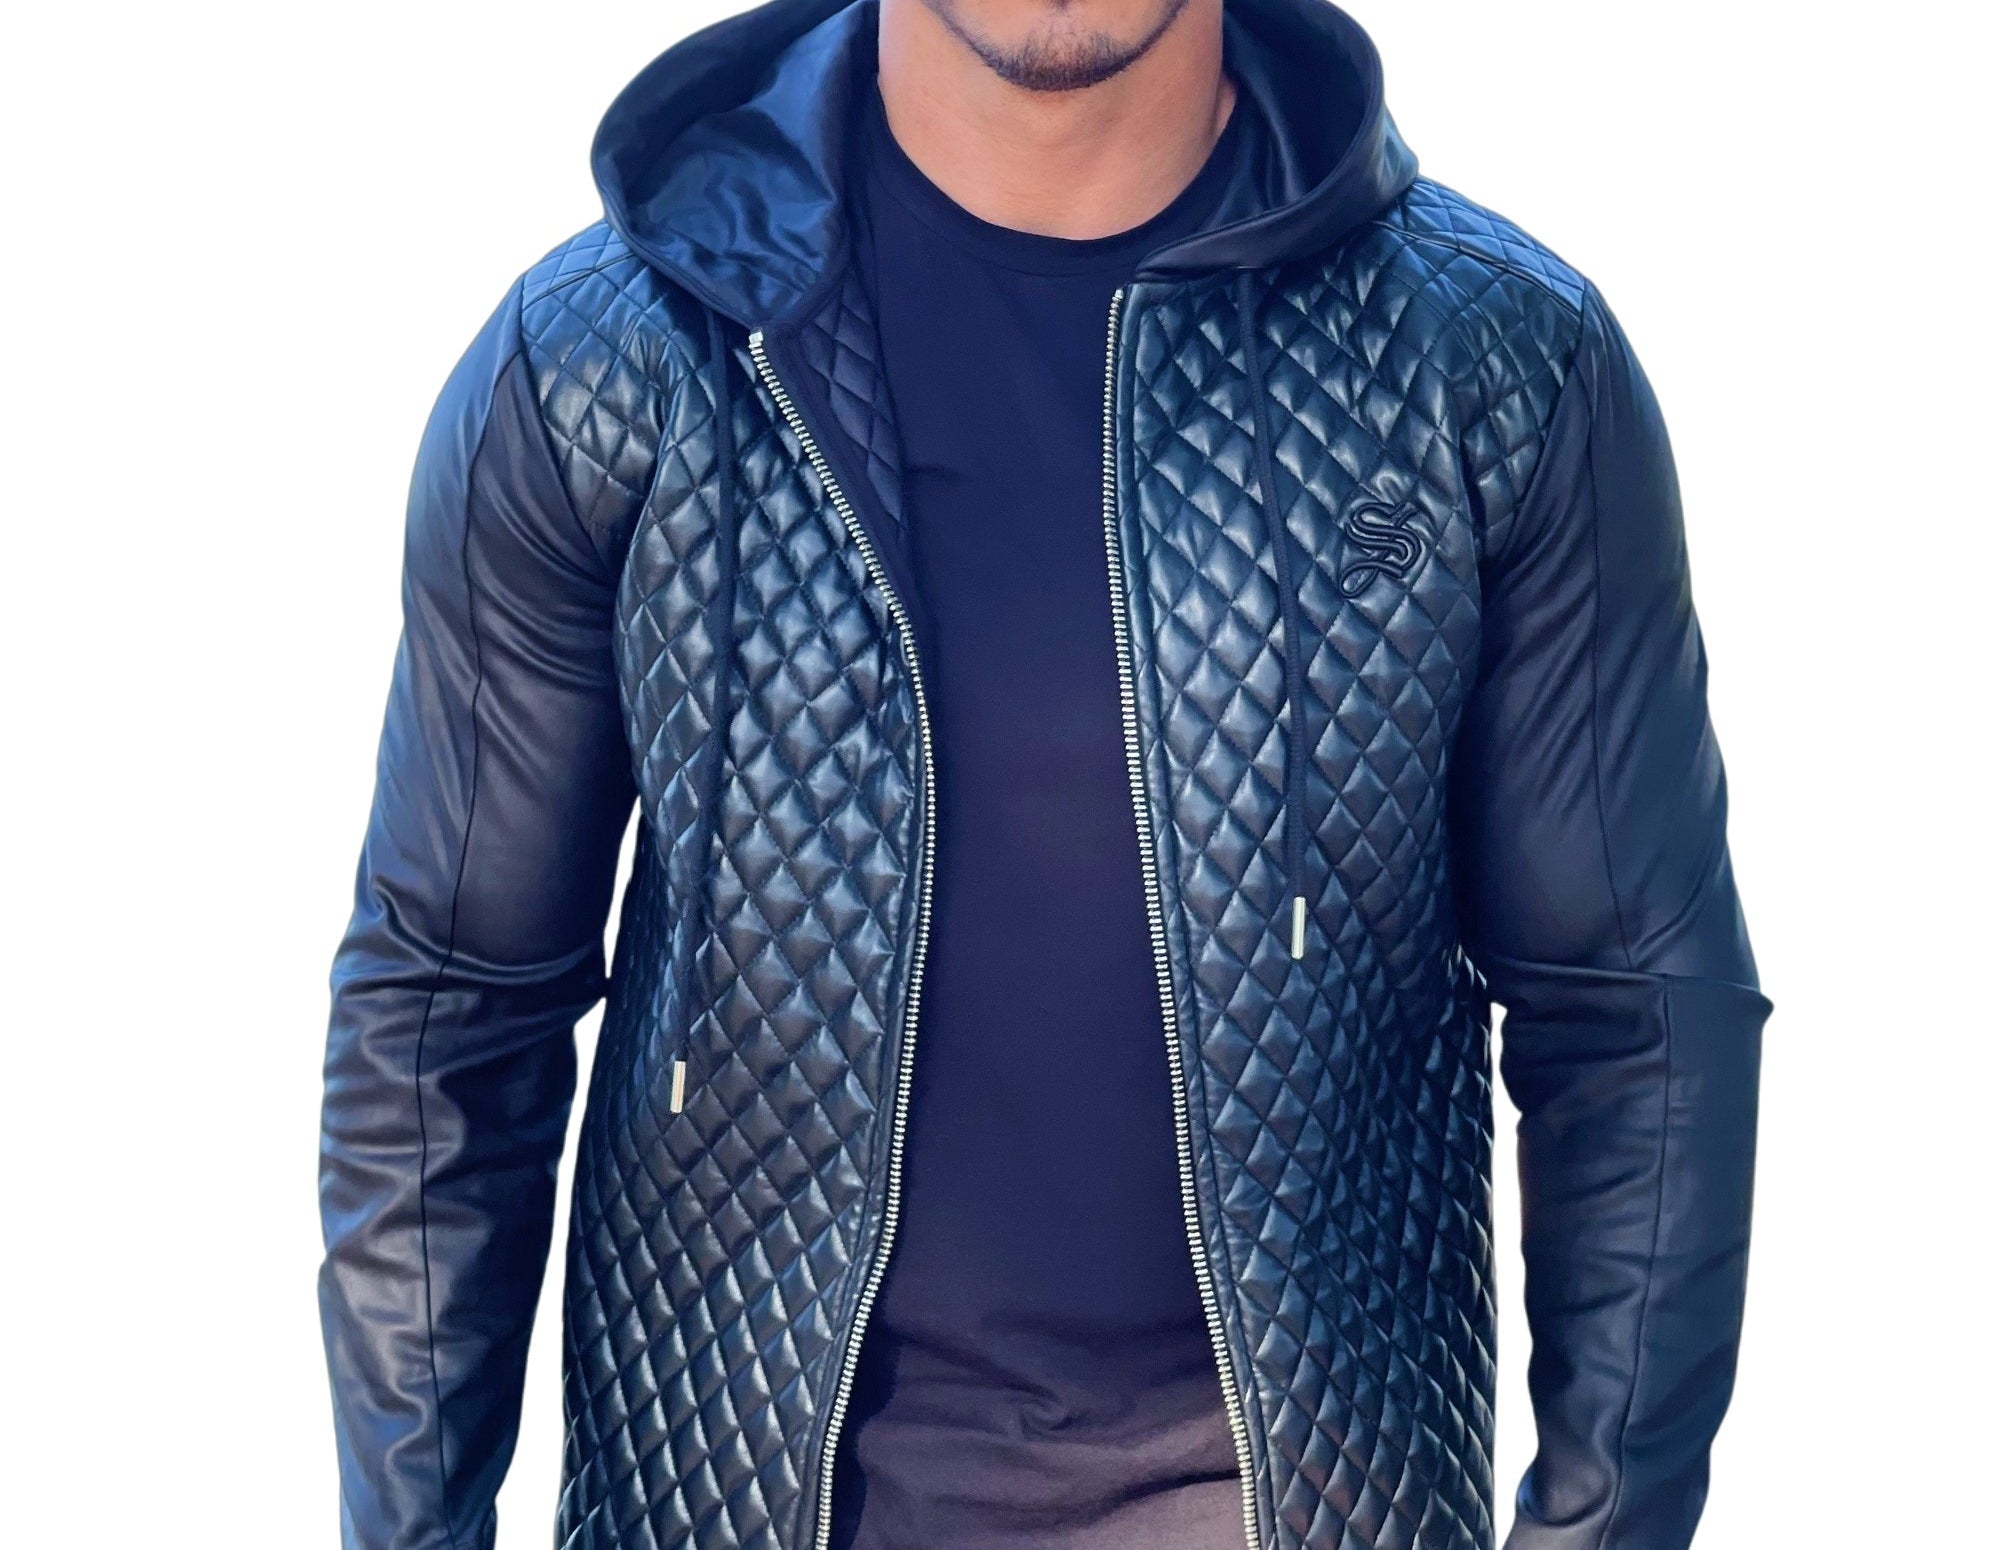 Robin - Black Jacket for Men (PRE-ORDER DISPATCH DATE 1 JULY 2022) - Sarman Fashion - Wholesale Clothing Fashion Brand for Men from Canada